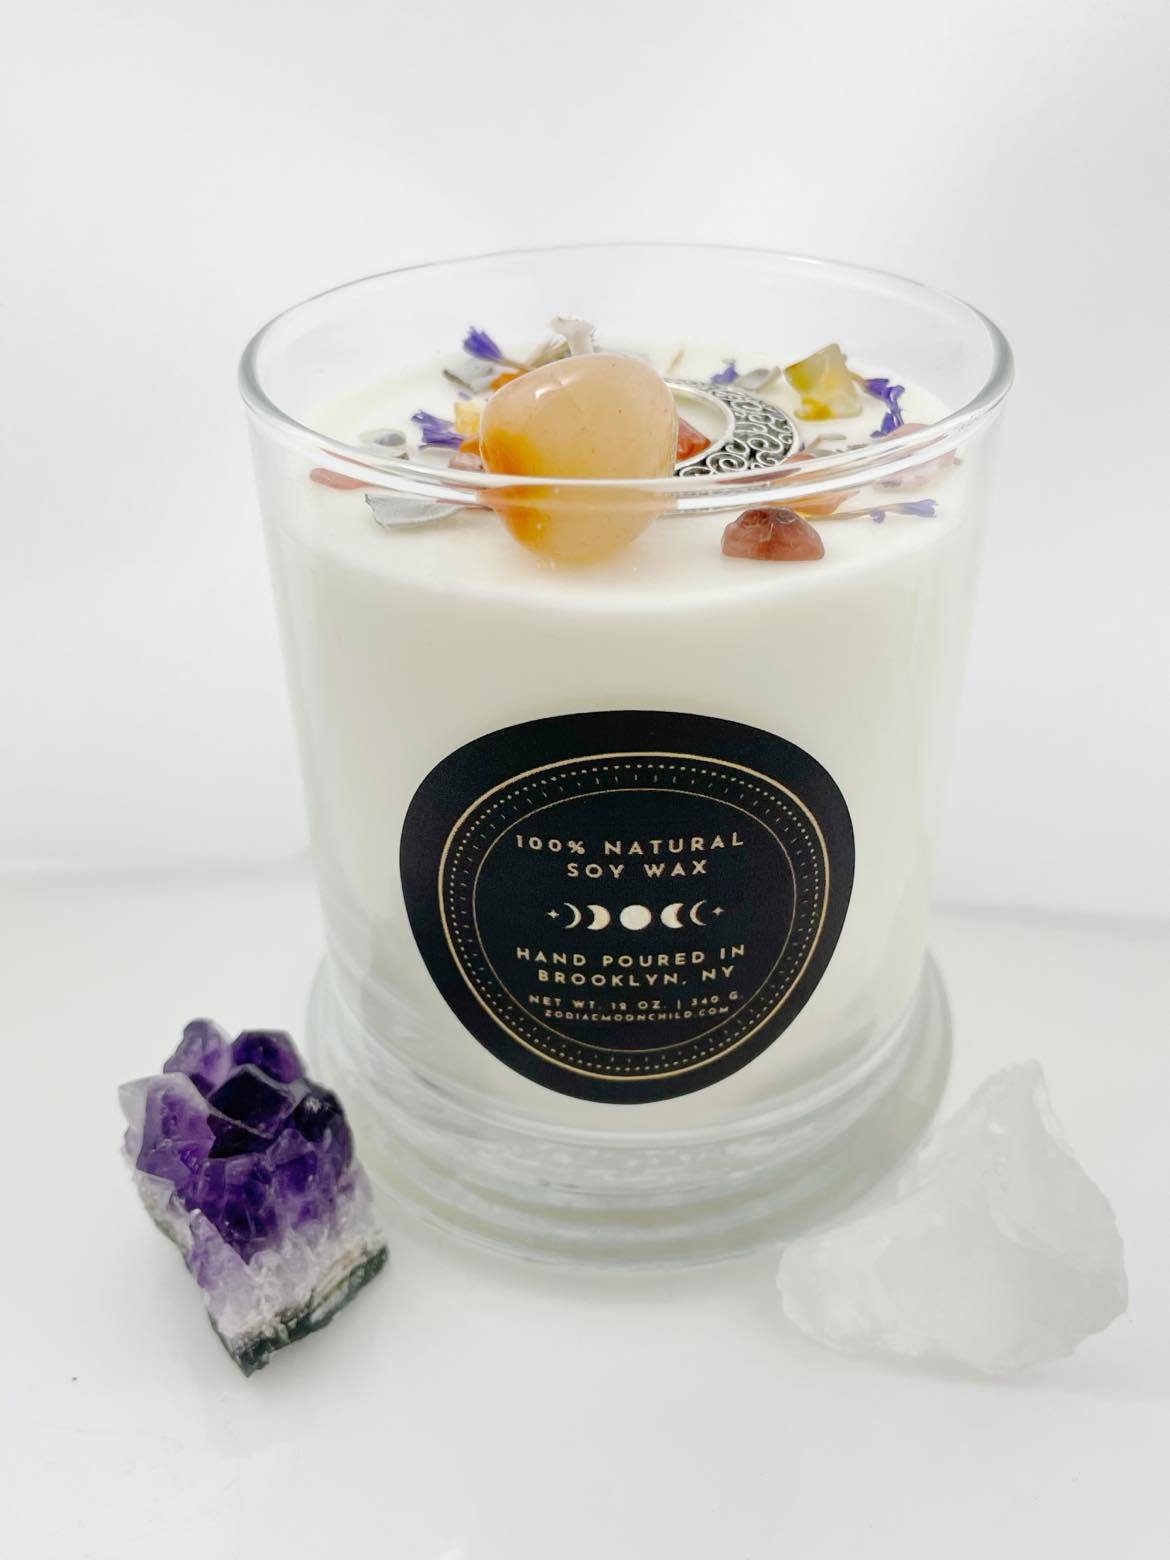 Aura Cleanse: Full Moon - Suede and Smoke Crystal Candle